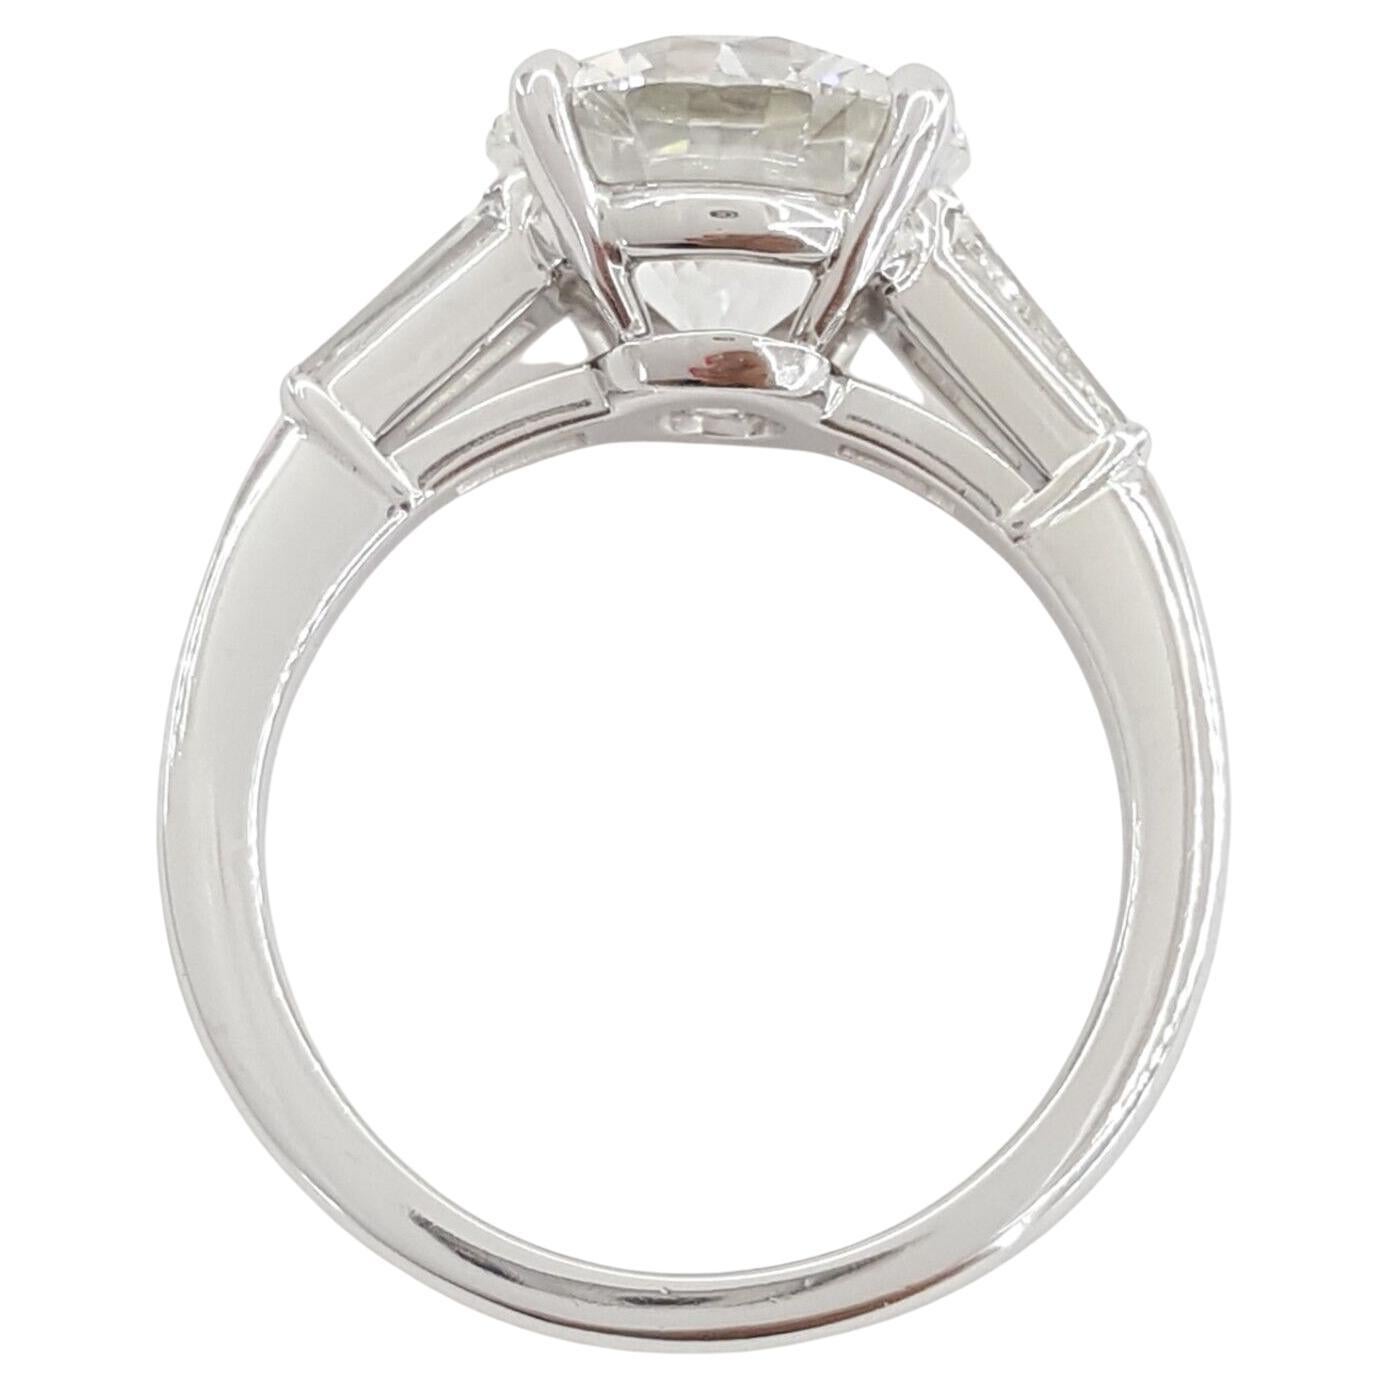 Tiffany & Co.  Platinum Round Brilliant Cut Diamond Solitaire Engagement Ring. 
The main diamond is a Round Brilliant Cut diamond weighing 3.40 ct, G in color, VVS2 in clarity. The center stone has a excellent Cut, excellent Polish, excellent